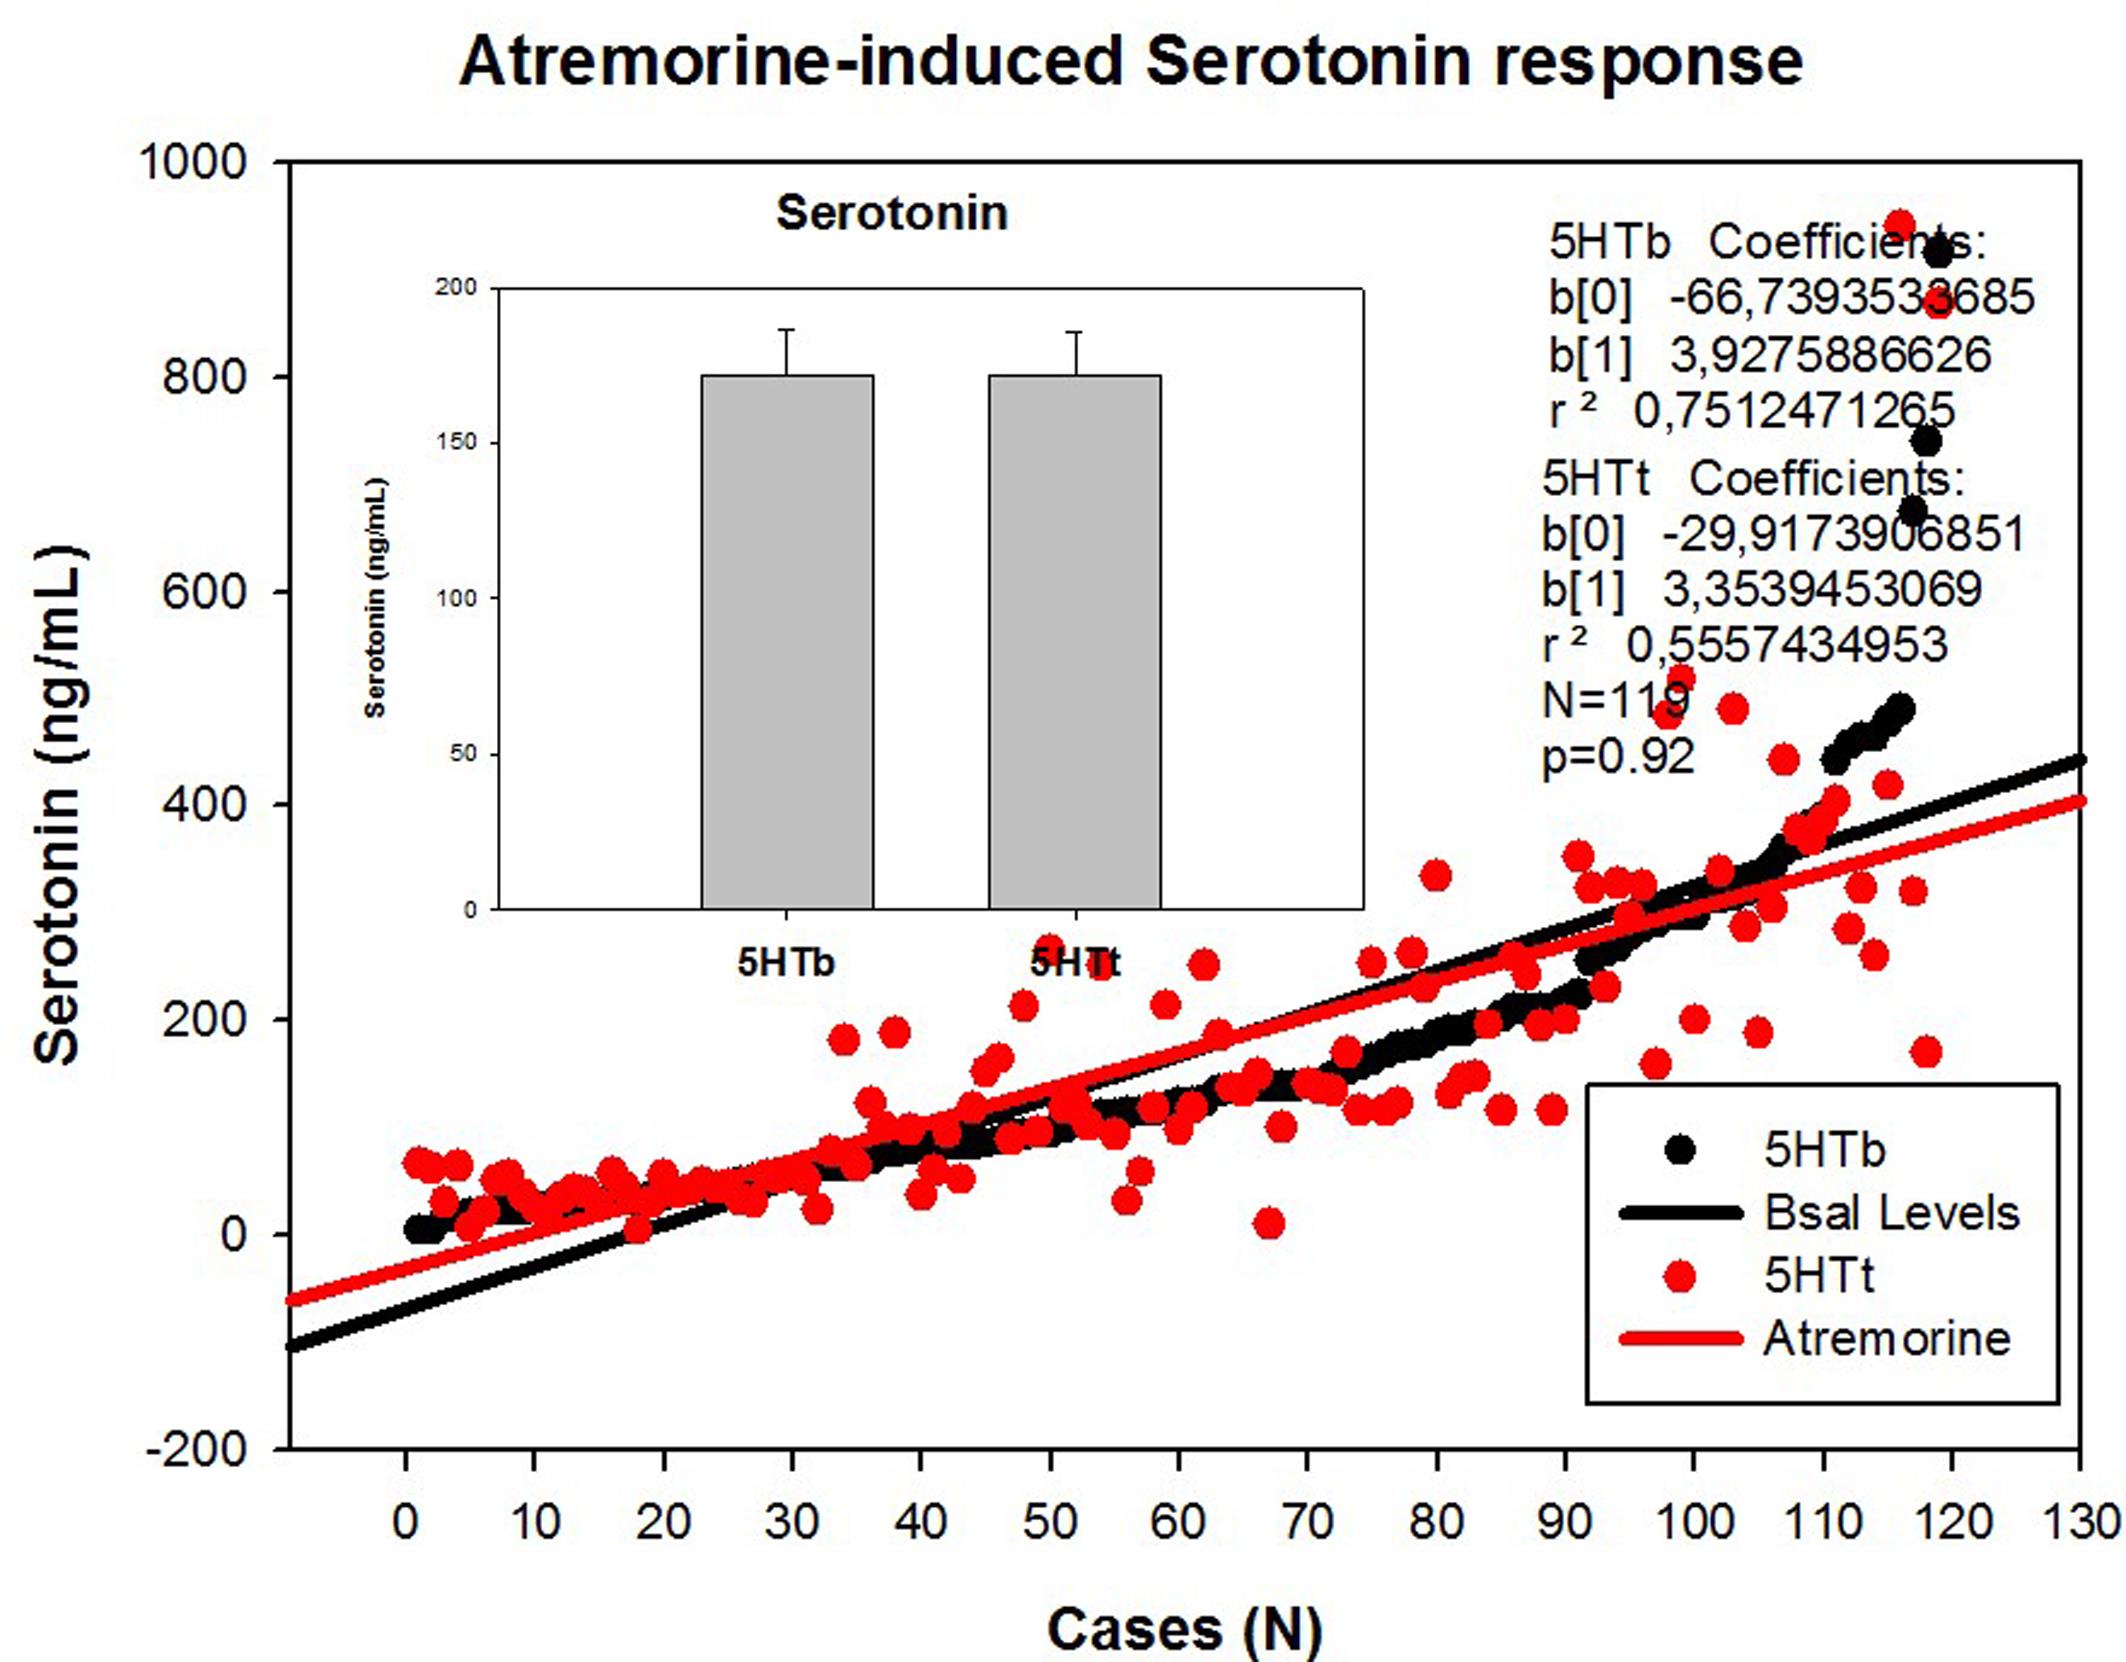 Atremorine-induced serotonin (5-hydroxy-tryptamine, 5HT) response in patients with Parkinsonian disorders.